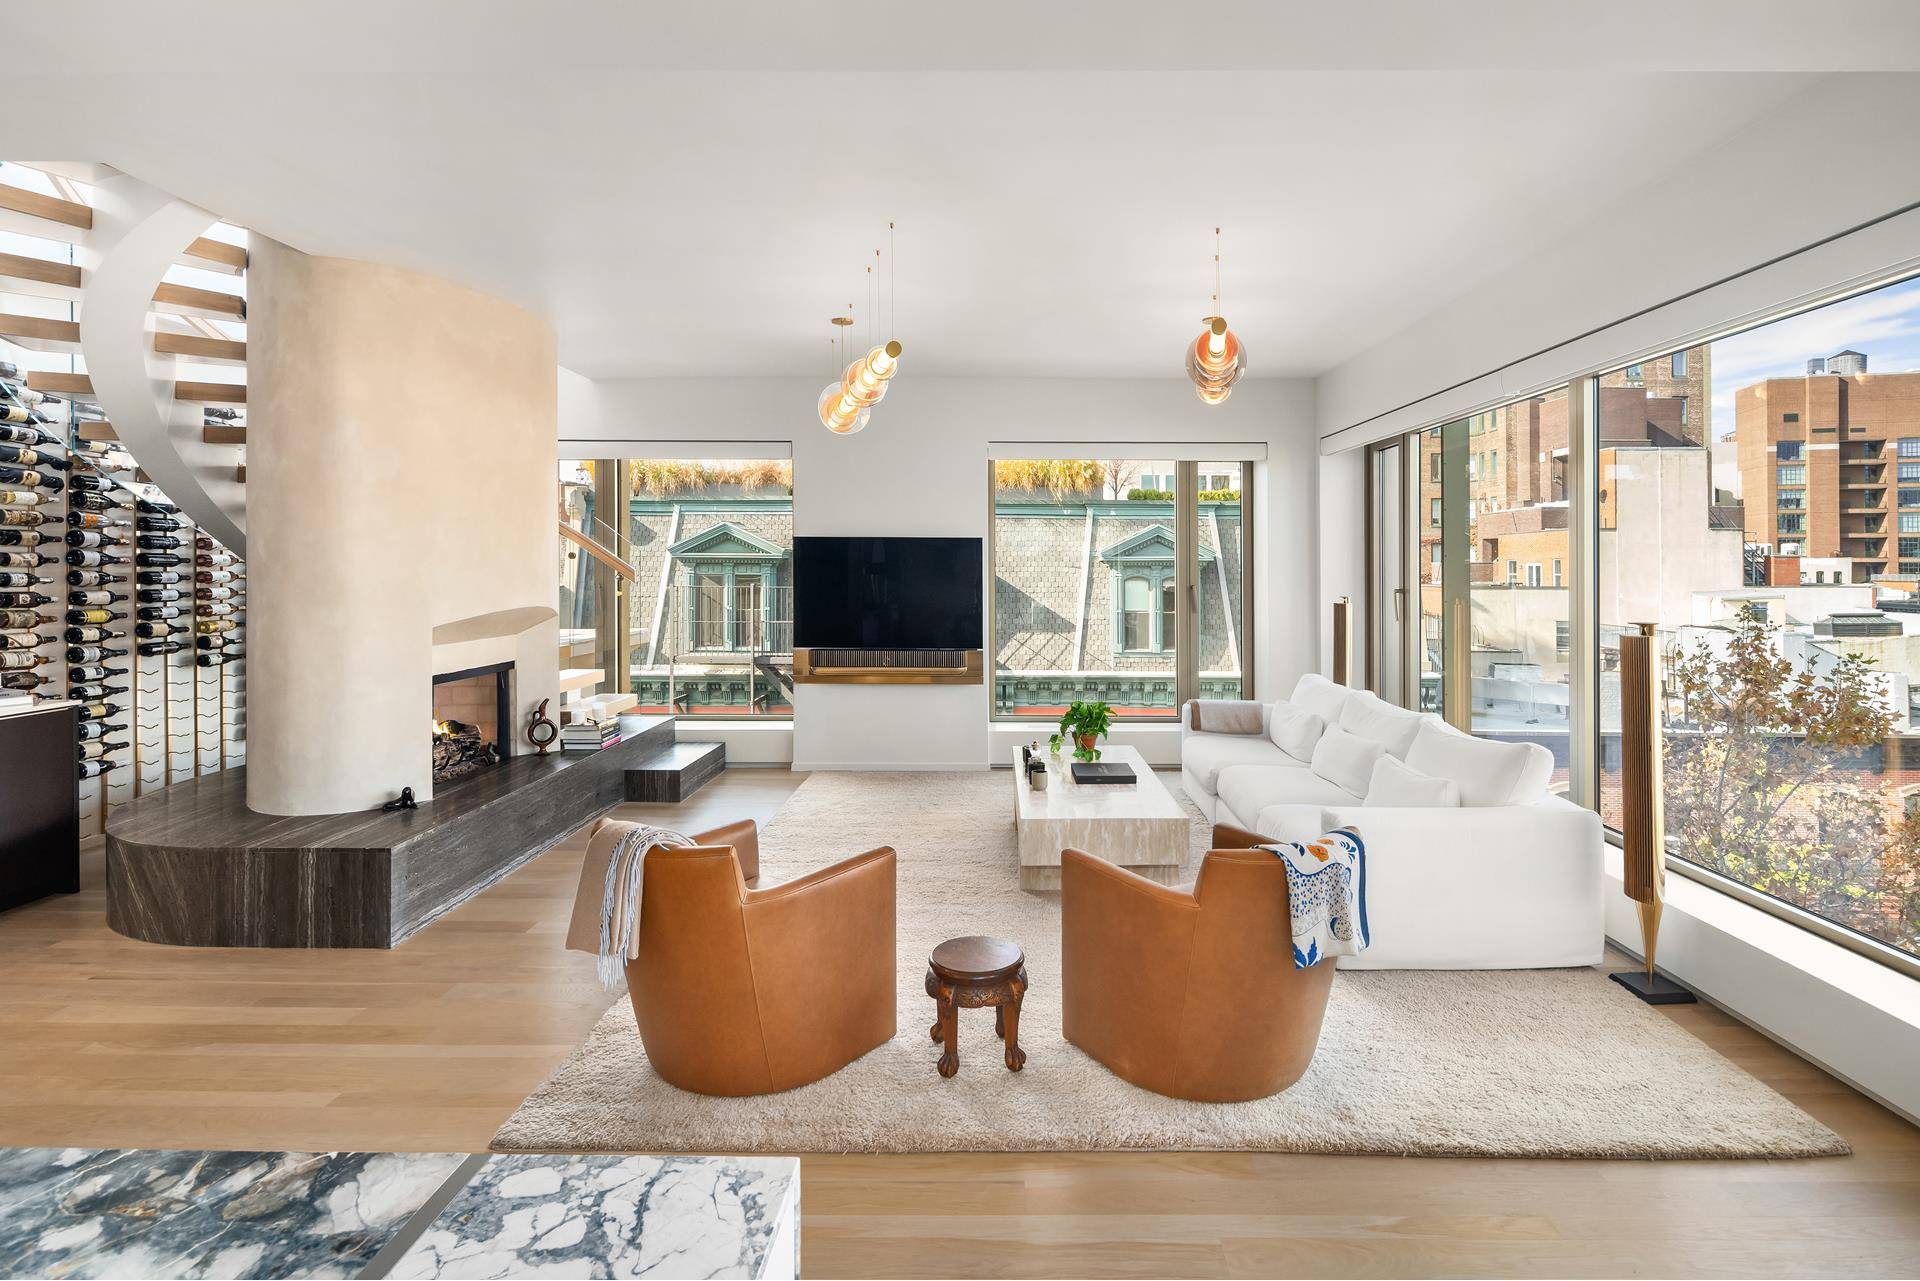 SHOWSTOPPER DOWNTOWN PENTHOUSE WITH PRIVATE TERRACE amp ; PARKING SPOT INCLUDEDRESIDENCE PHC AT 75 KENMARE STREET is an exquisite corner Penthouse situated in a new development condominium building located in ...